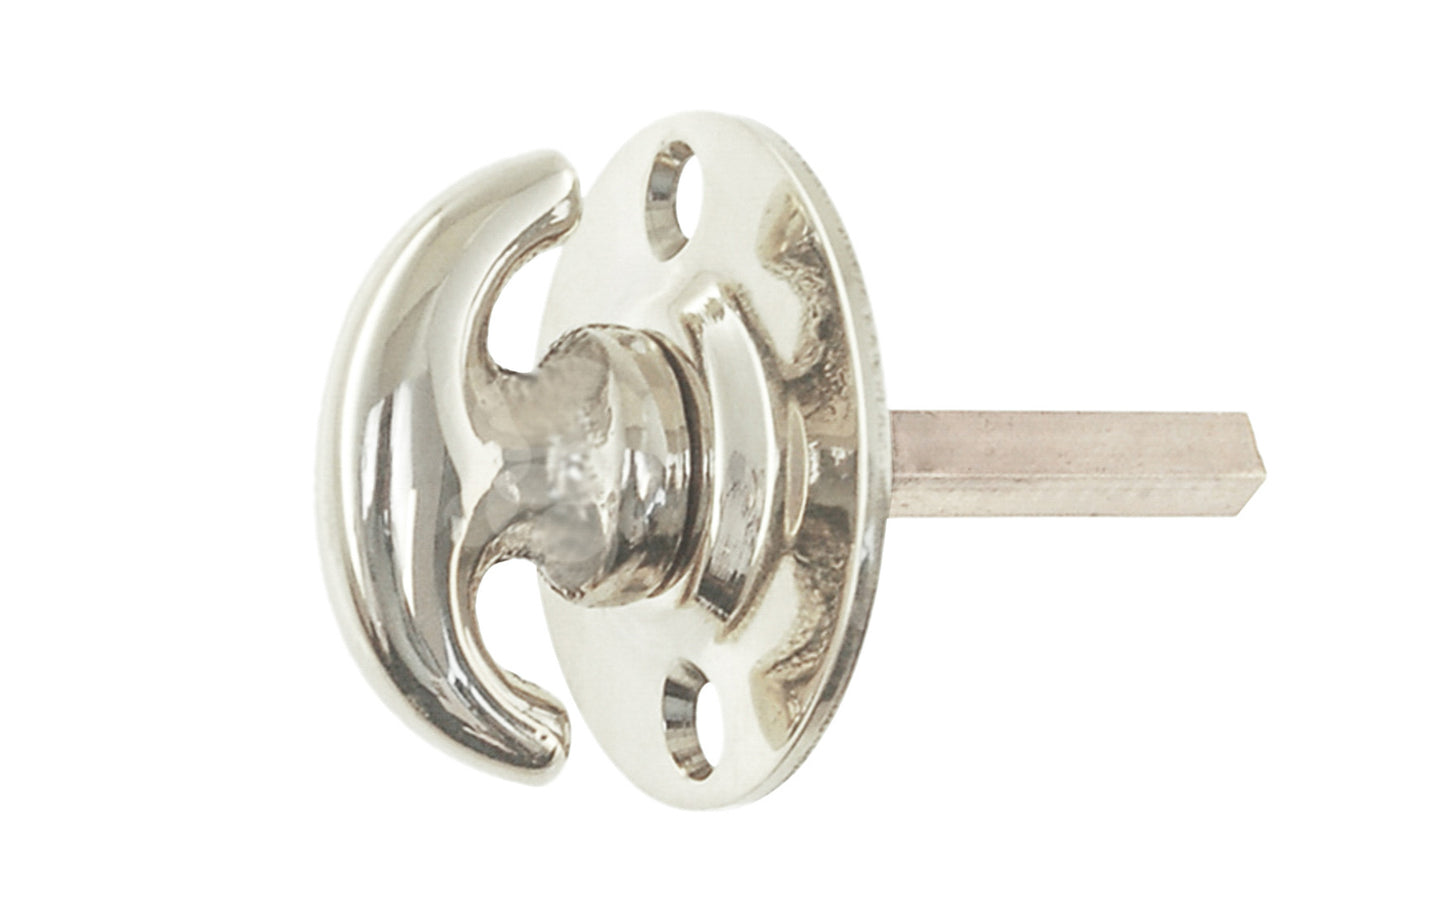 An old-style Classic Solid Brass crescent thumbturn with round plate for locking doors. Used with mortise locks, deadbolts, night-locks, catches. Made of solid brass material. 3/16" thick shaft. Polished nickel finish